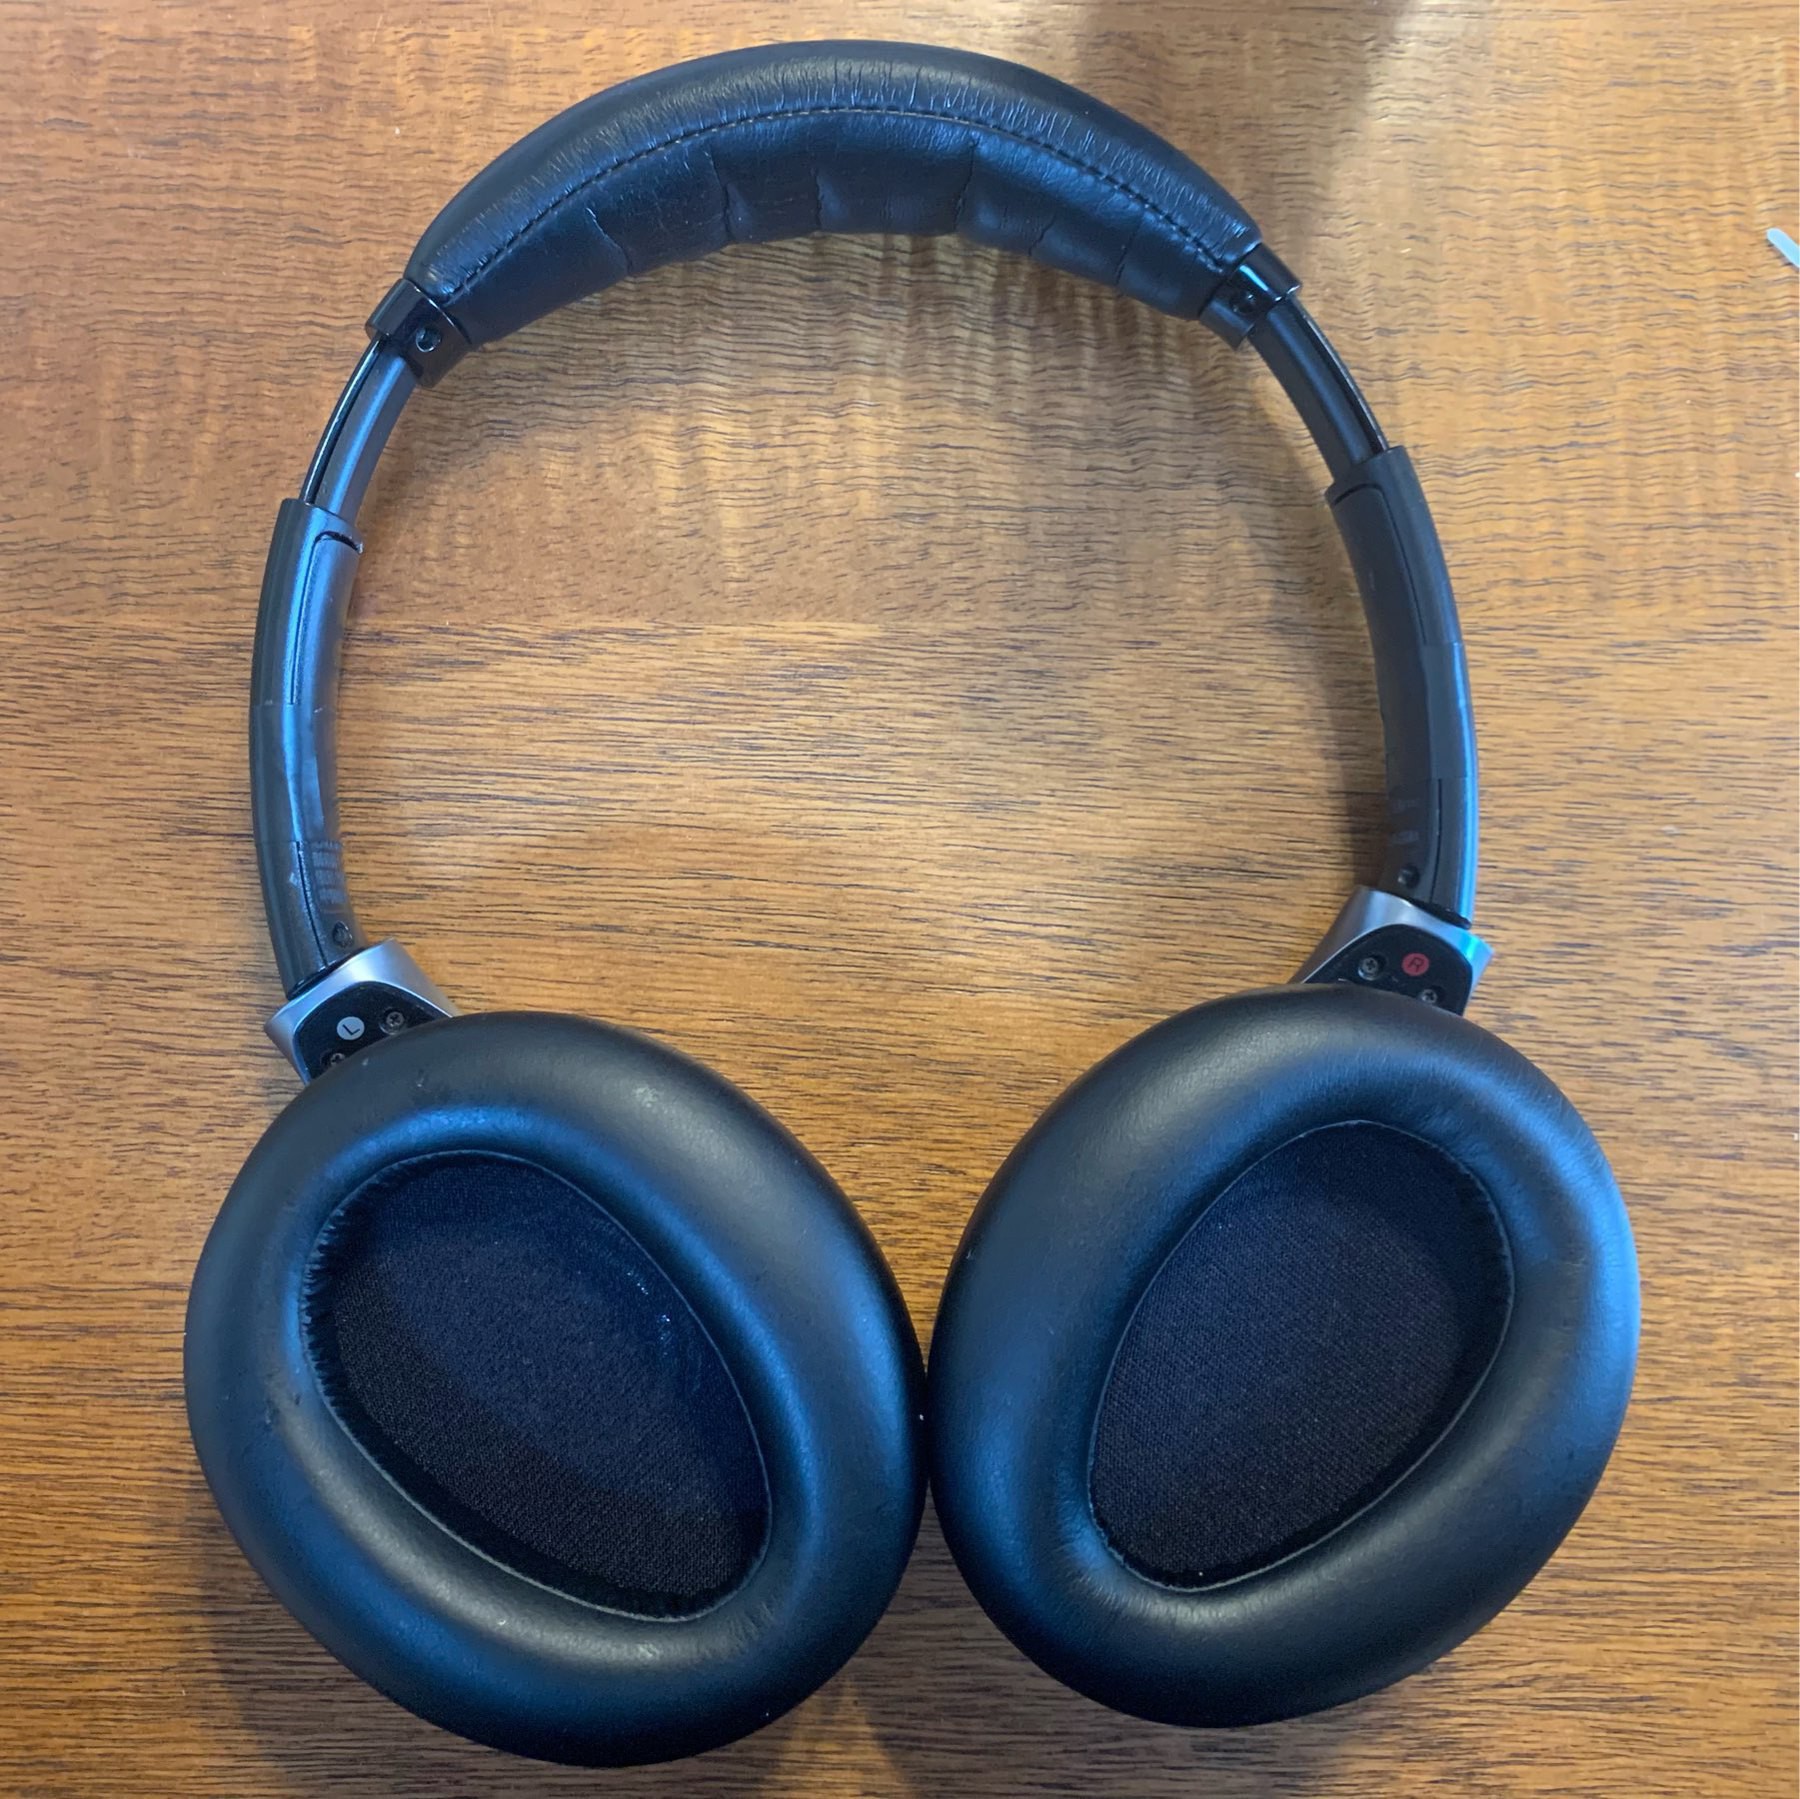 The same headphones with new ear pads. They look almost new!